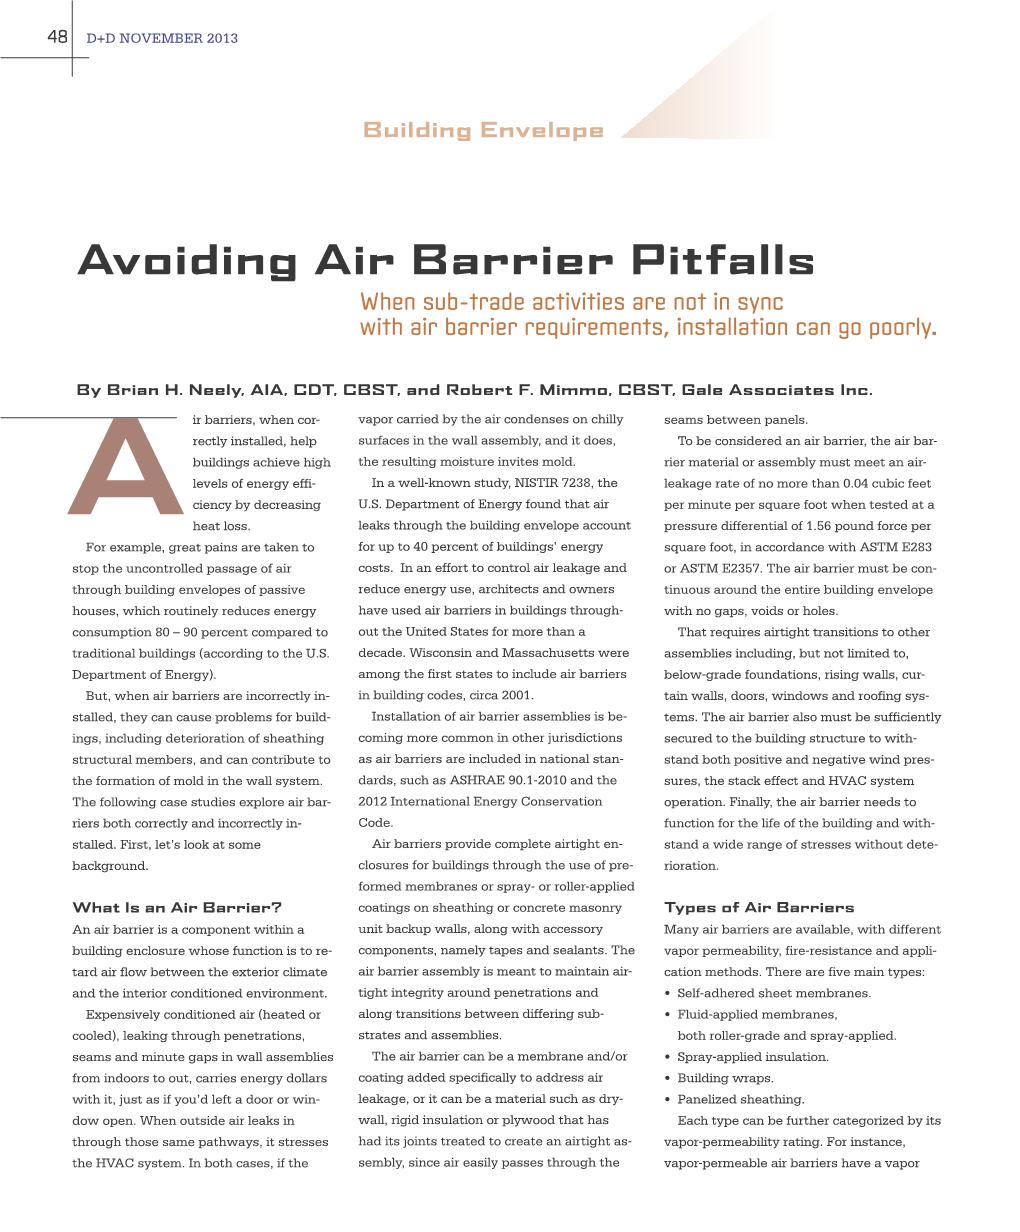 Avoiding Air Barrier Pitfalls When Sub-Trade Activities Are Not in Sync with Air Barrier Requirements, Installation Can Go Poorly